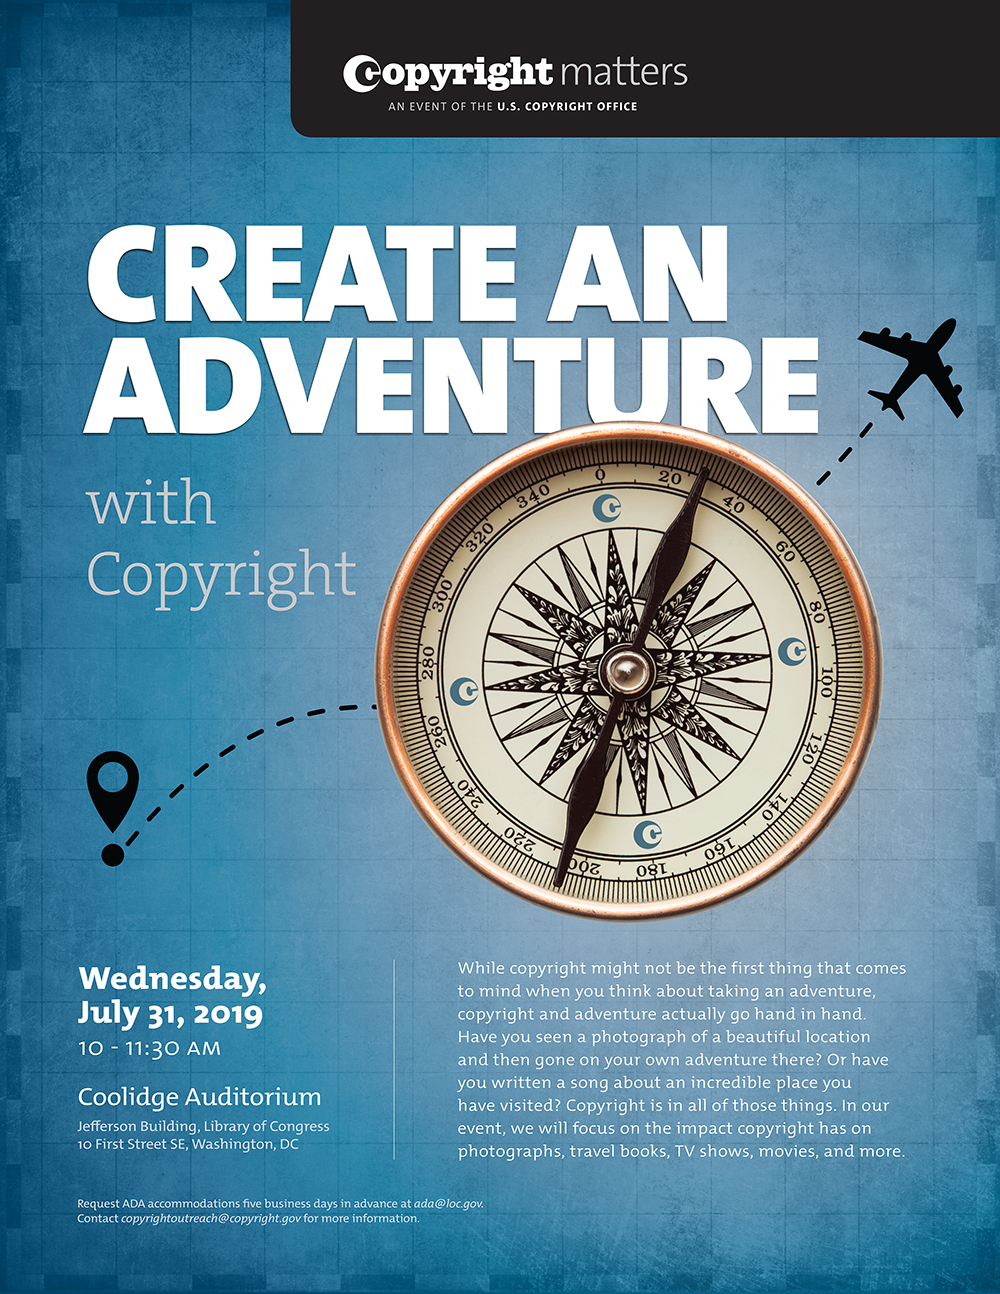 Create An Adventure with Copyright Flyer